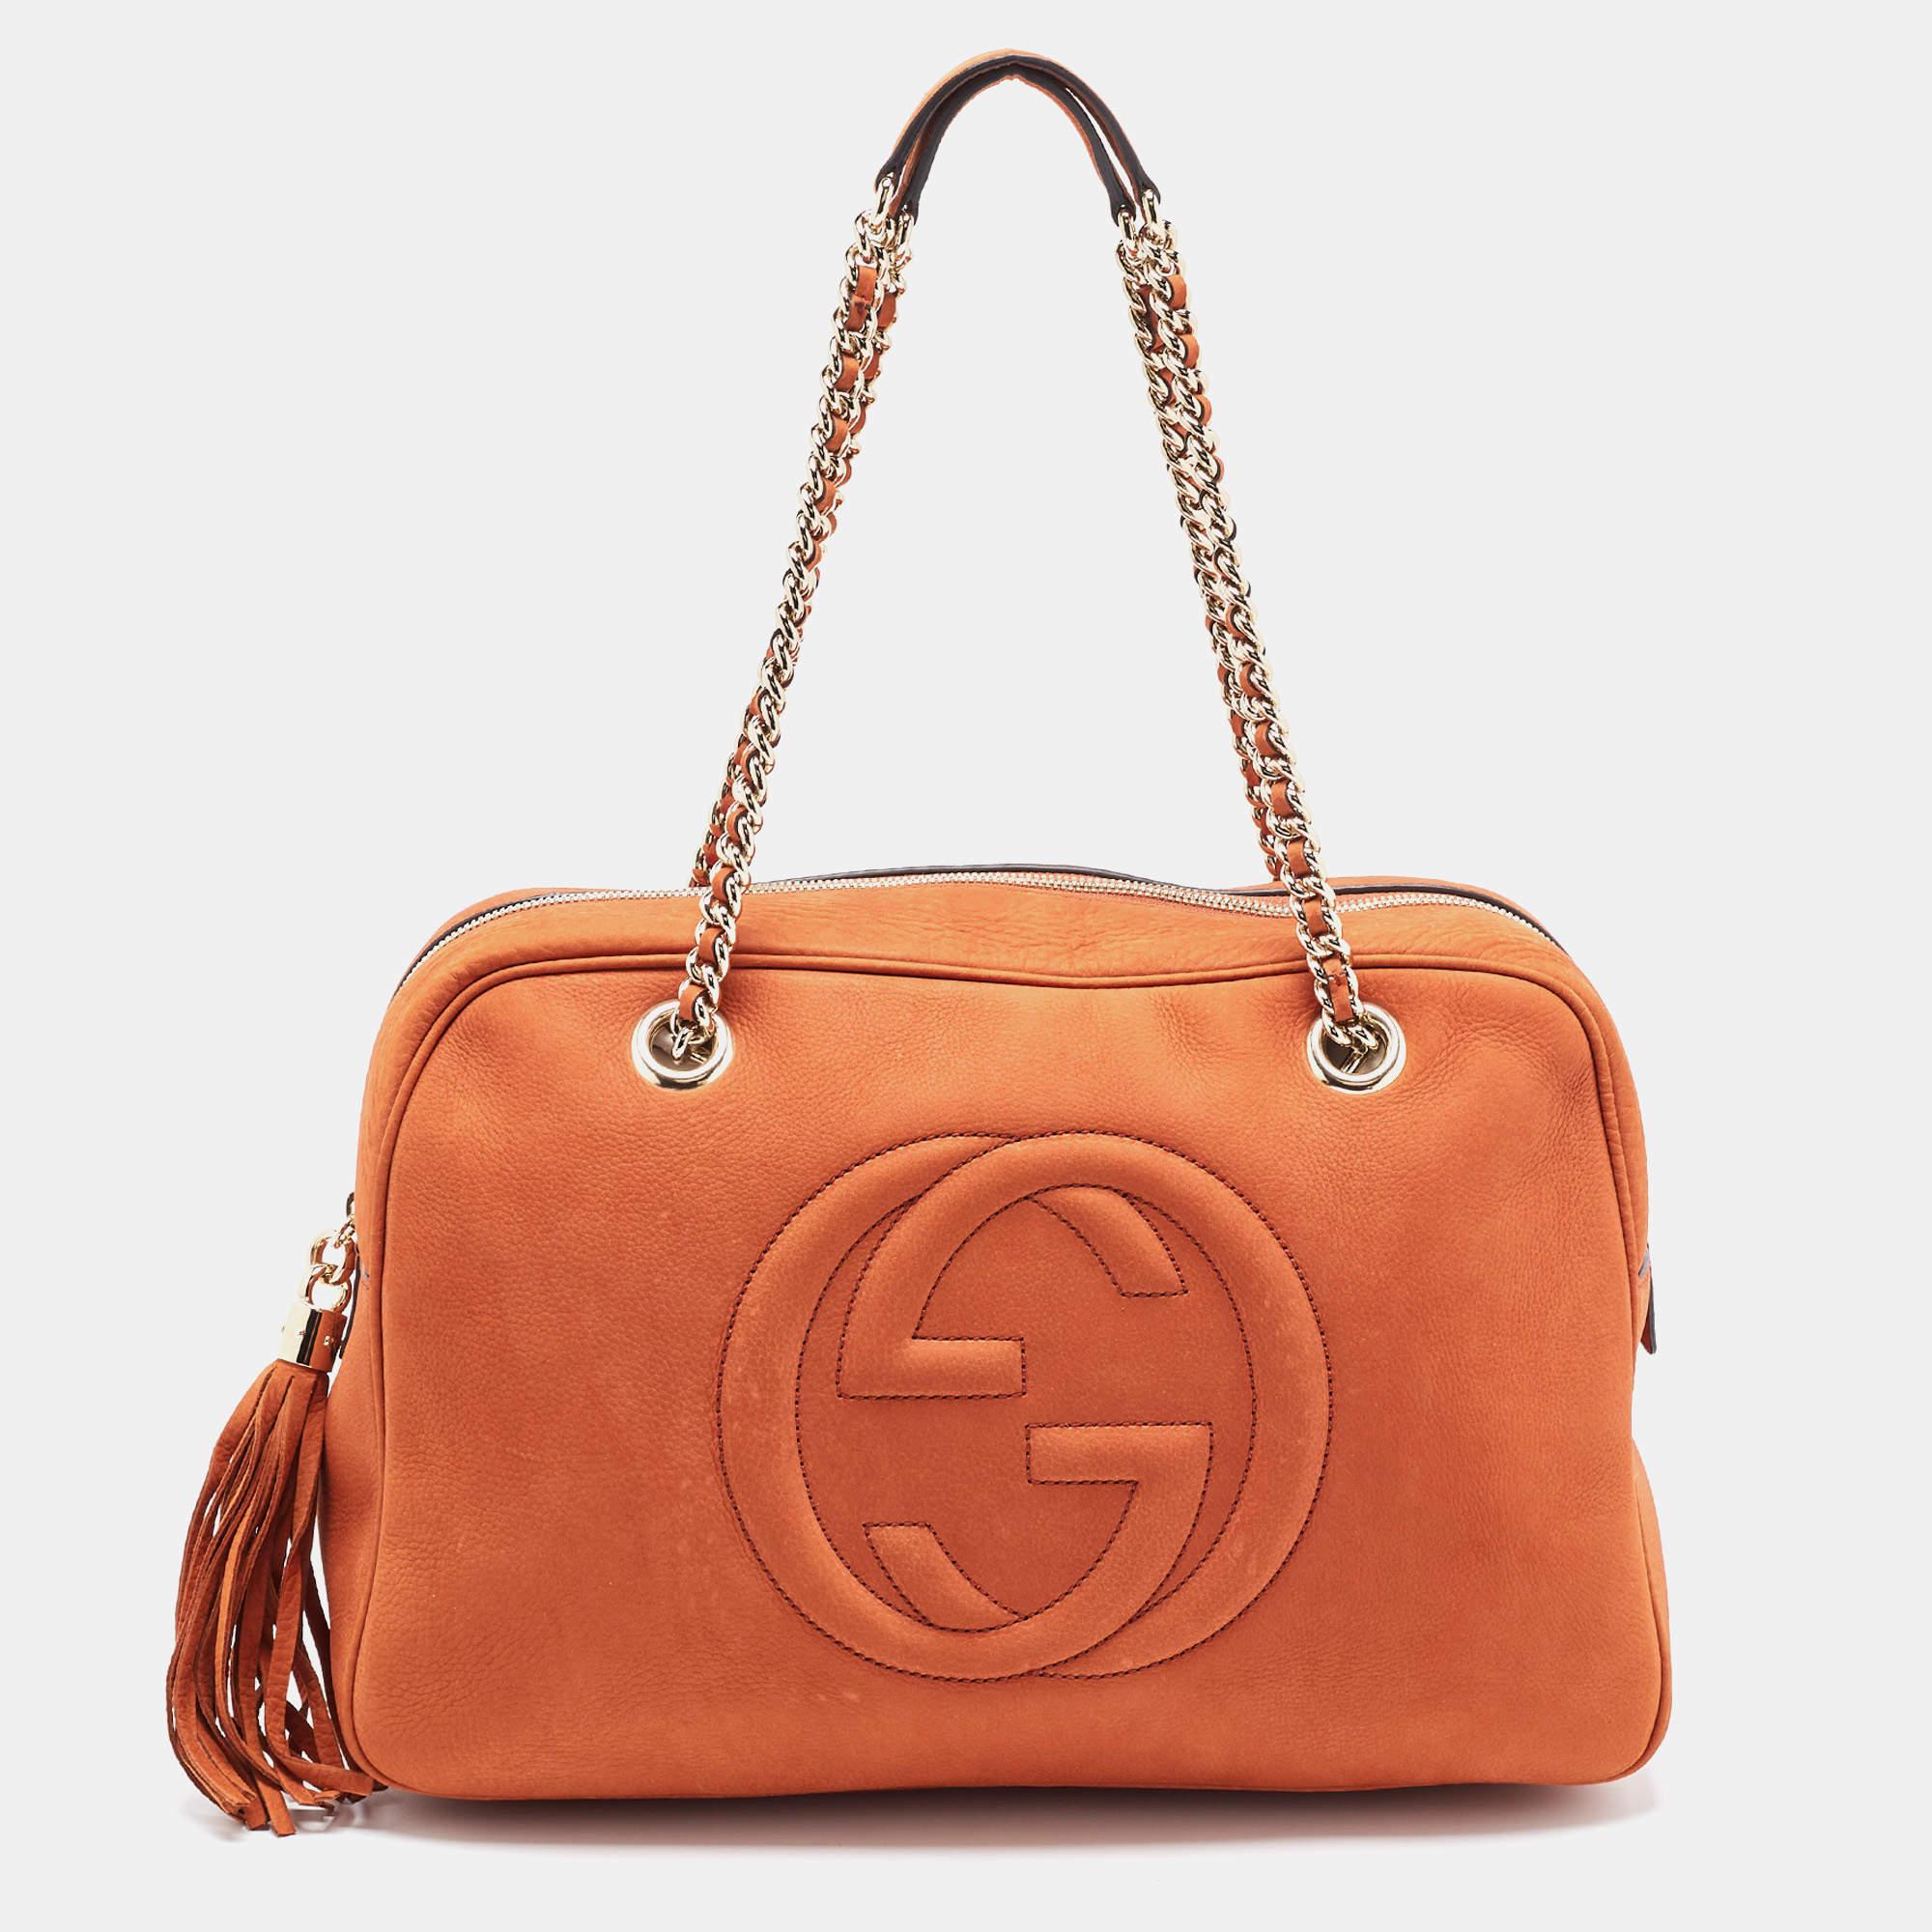 Indulge in luxury with this Gucci Soho bag. Meticulously crafted from premium materials, it combines exquisite design, impeccable craftsmanship, and timeless elegance. Elevate your style with this fashion accessory.

